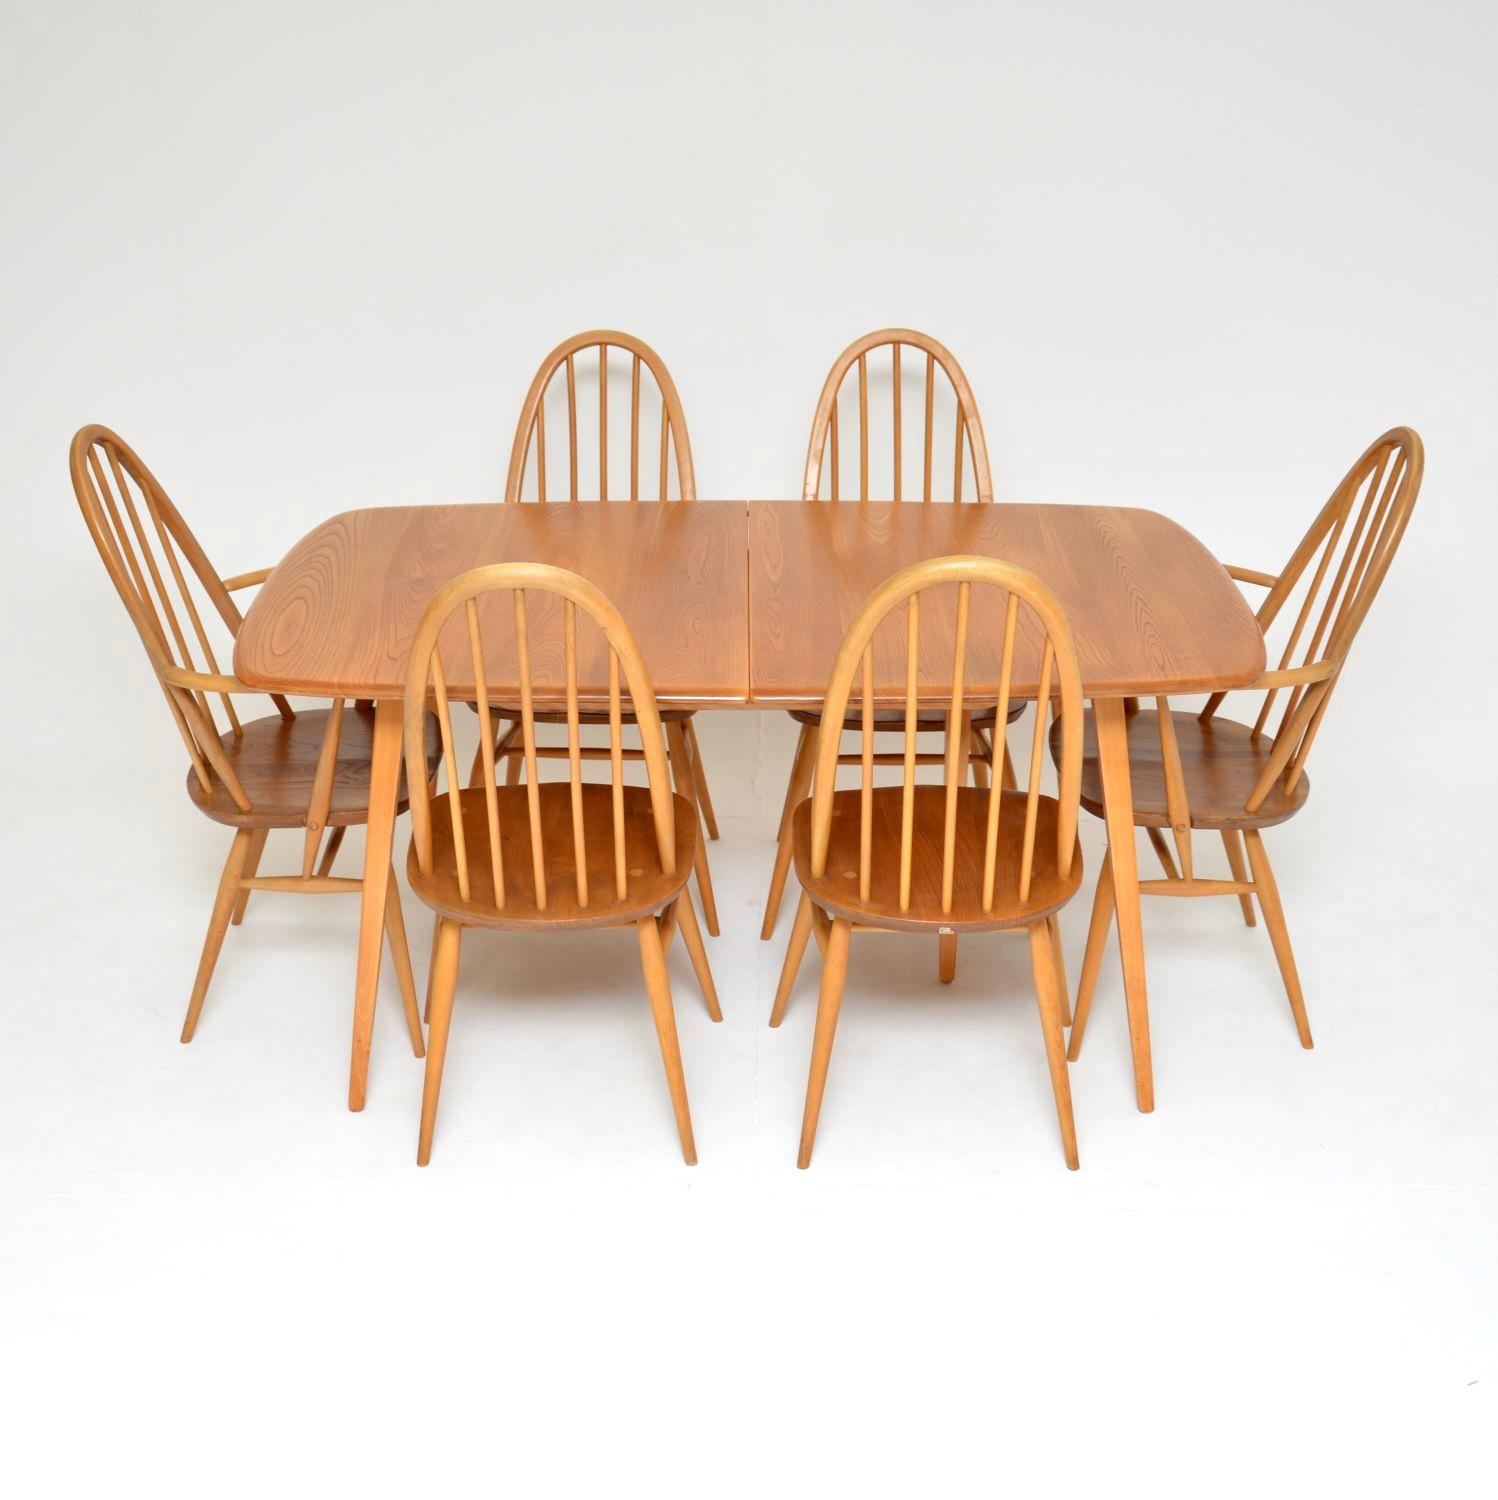 A stunning and iconic vintage Ercol dining table and chairs. These were made in England, they date from the 1960’s.

The dining table is the Grand Windsor model, it comes with an extra leaf to extend the dining area considerably. The top is solid